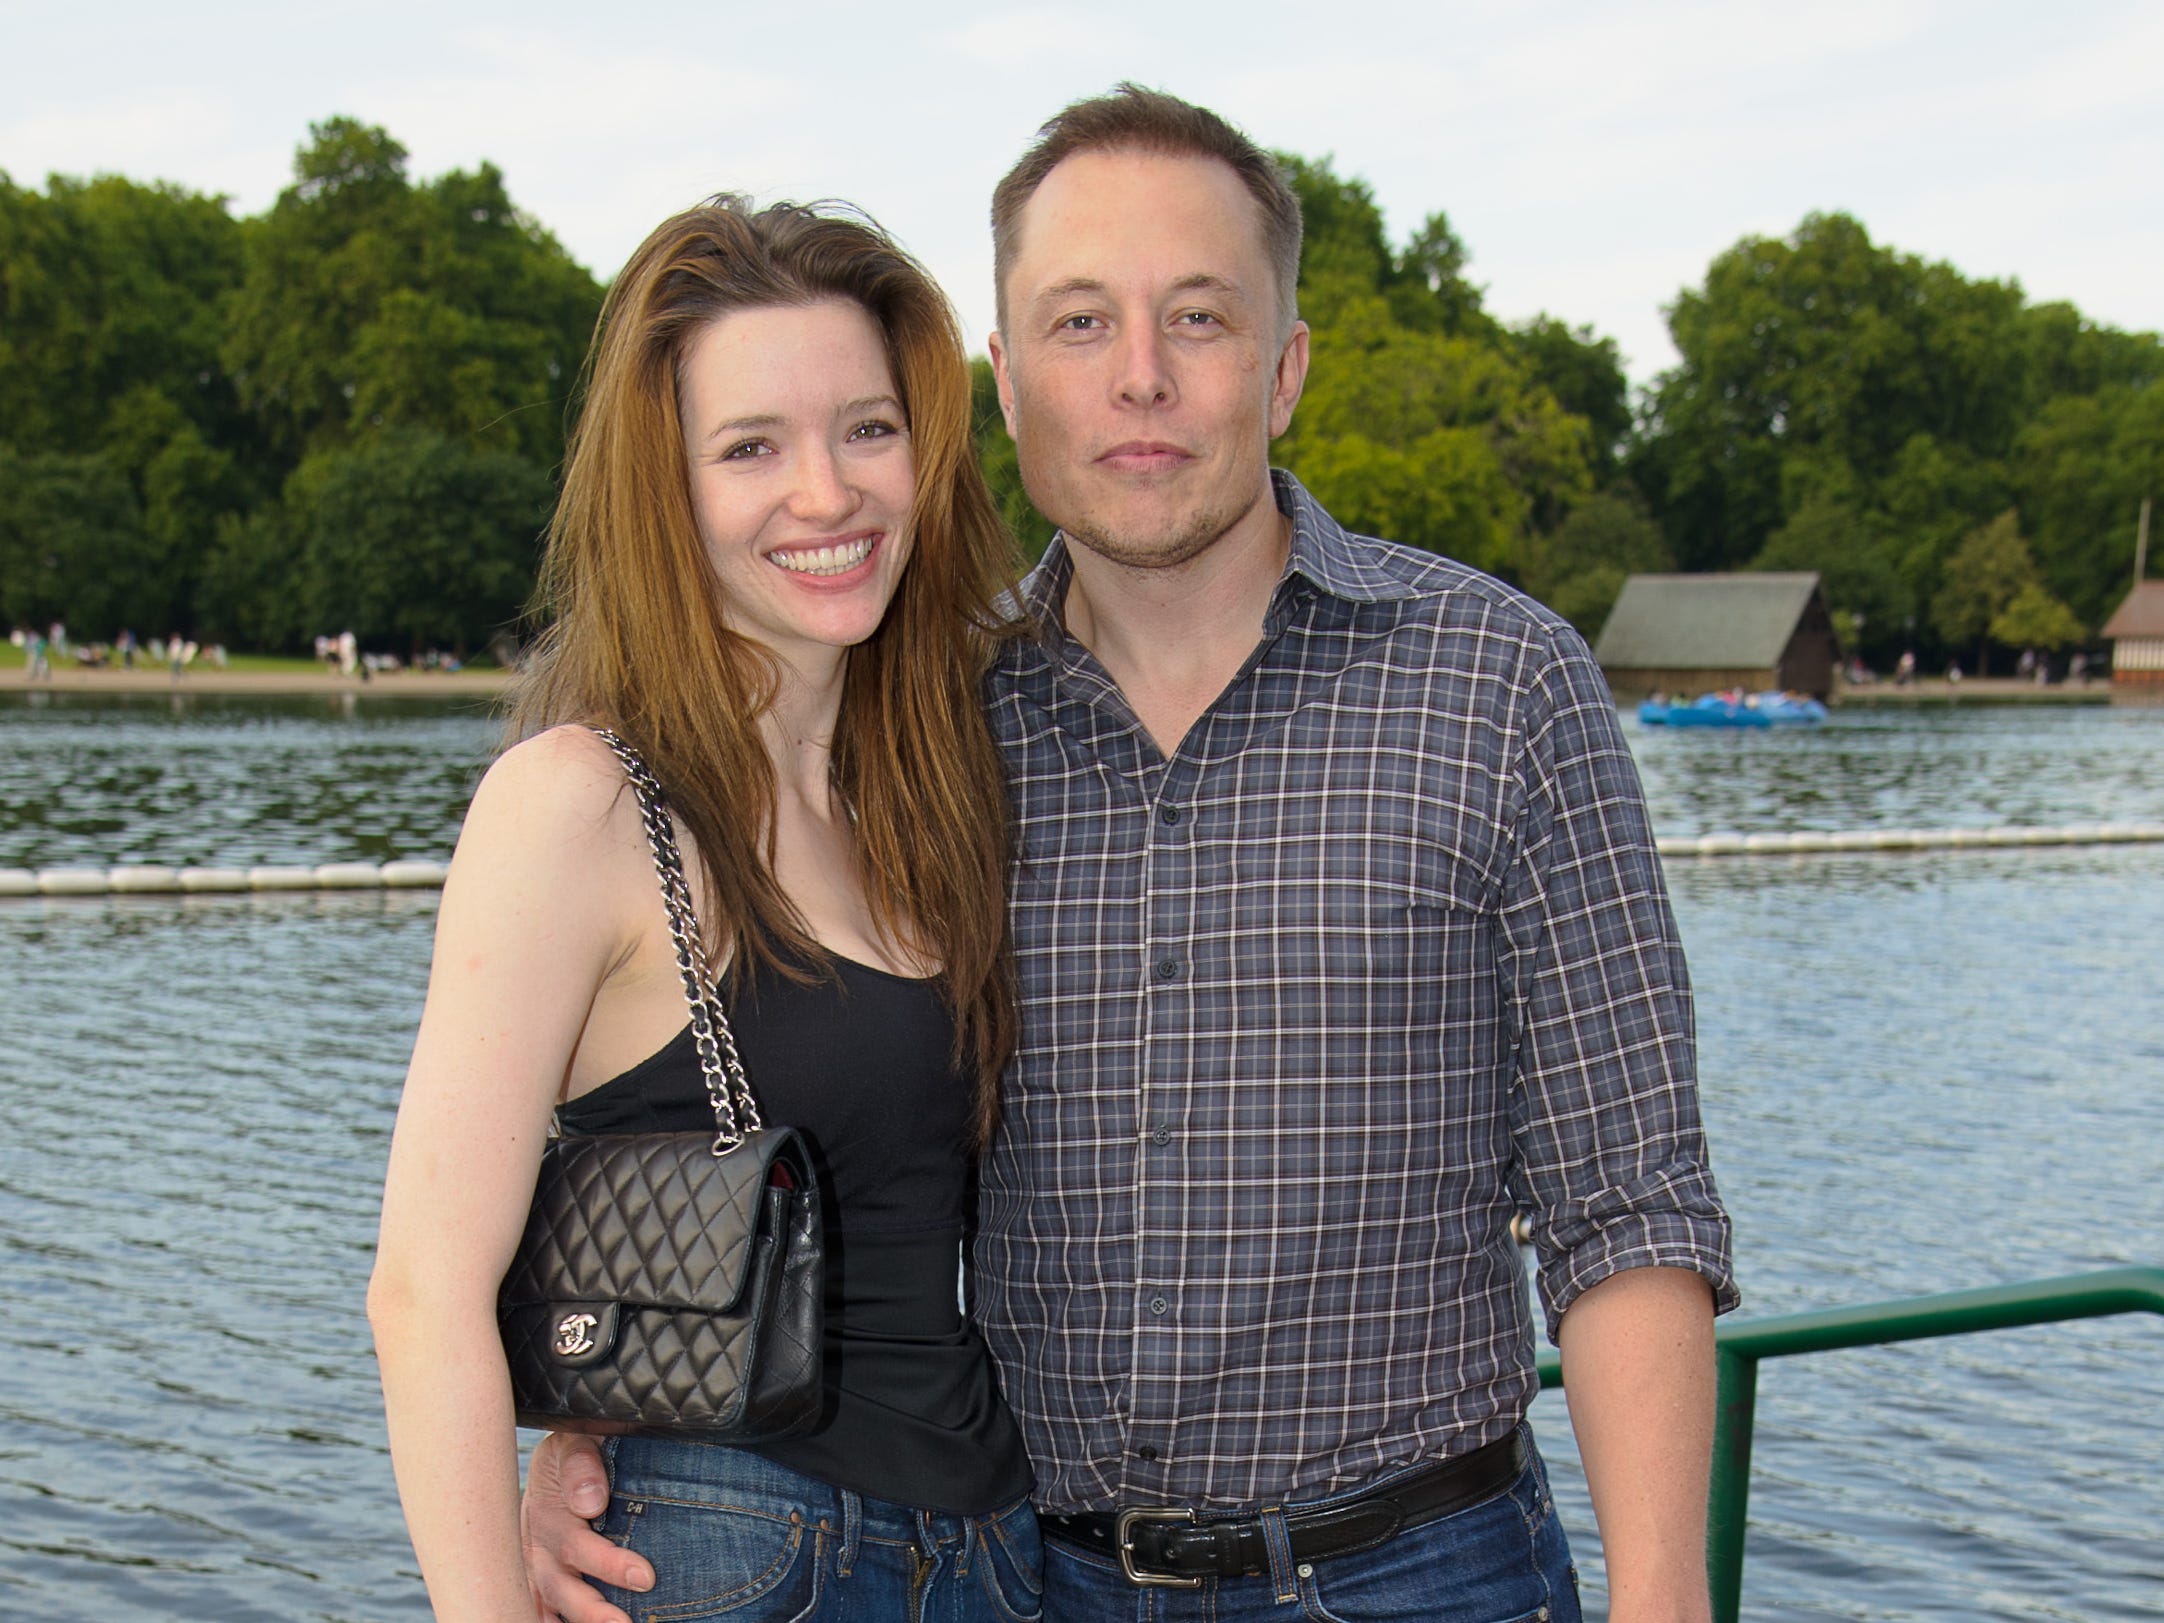 Talulah Riley and Elon Musk attend Chucs Dive & Mountain Shop's swim party at Serpentine on July 4, 2011 in London, England.